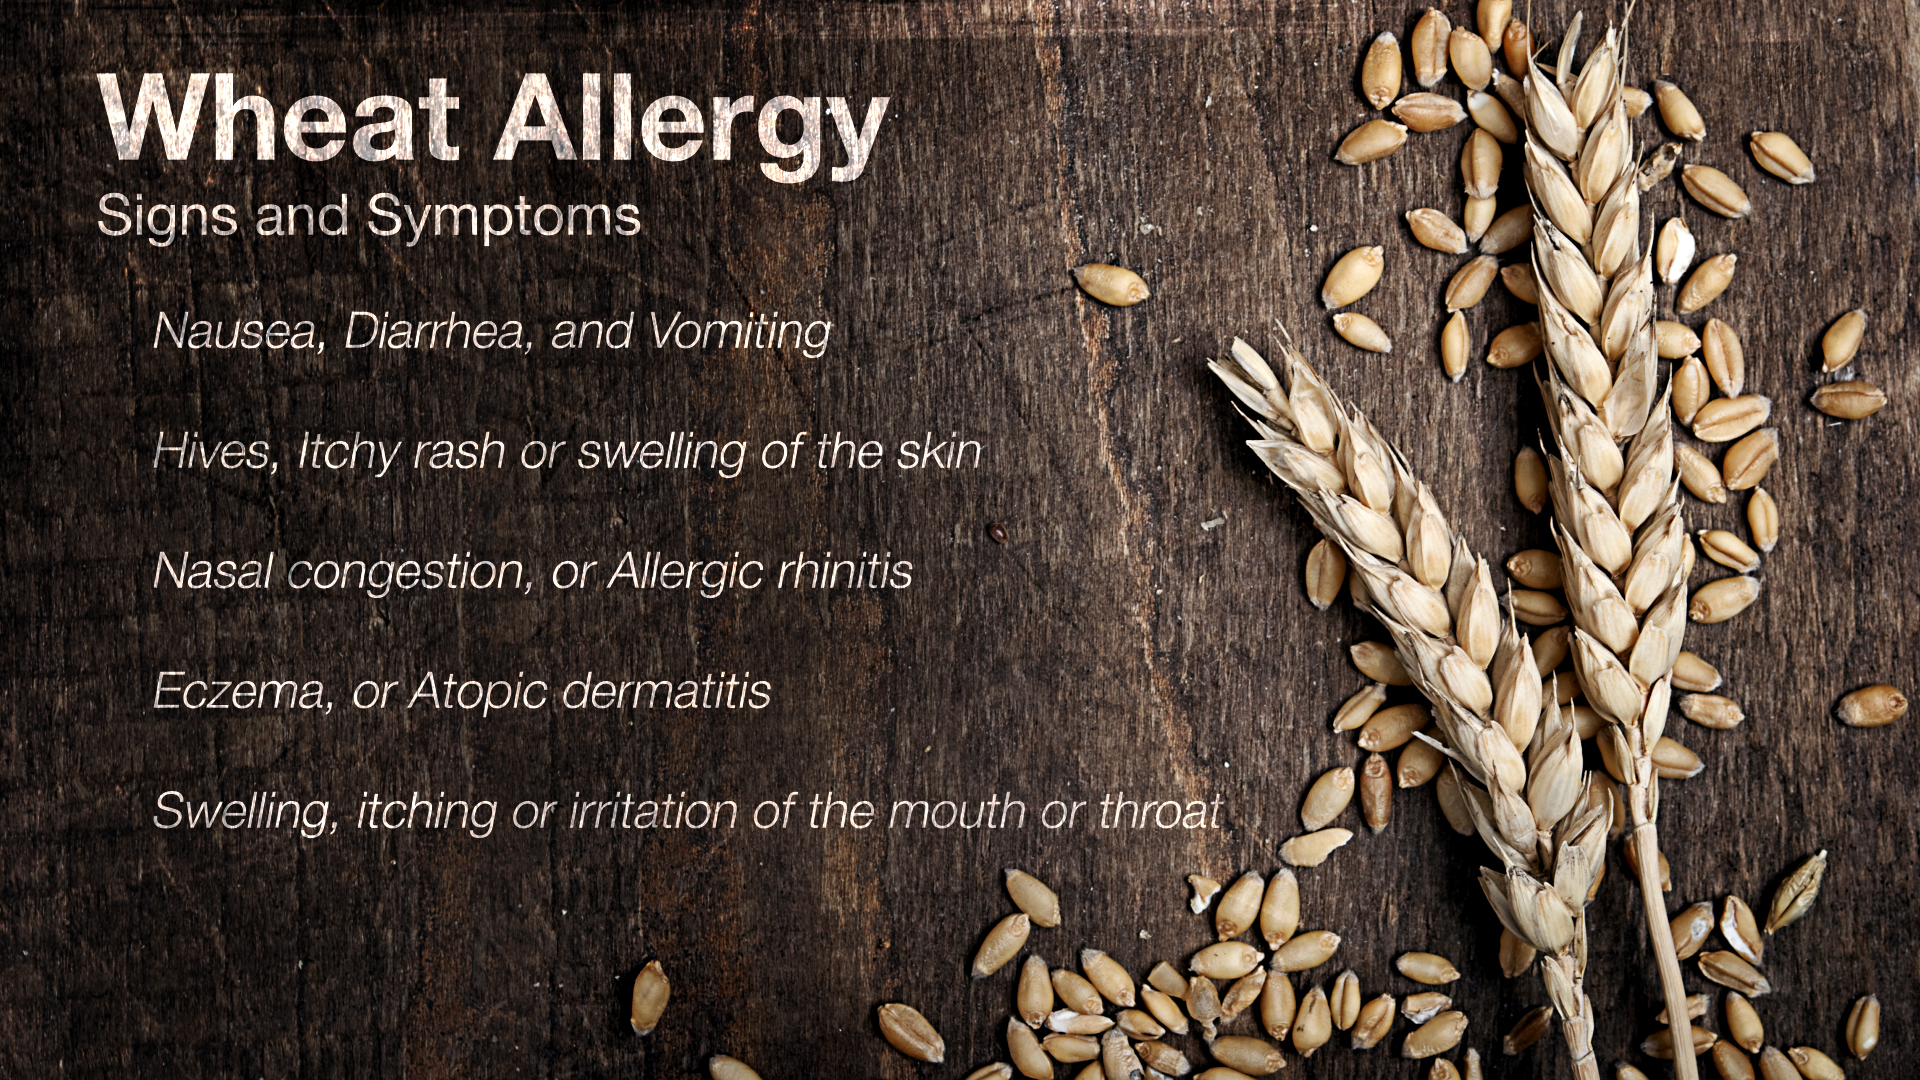 Medical animation still shot showing symptoms of Wheat-Allergy